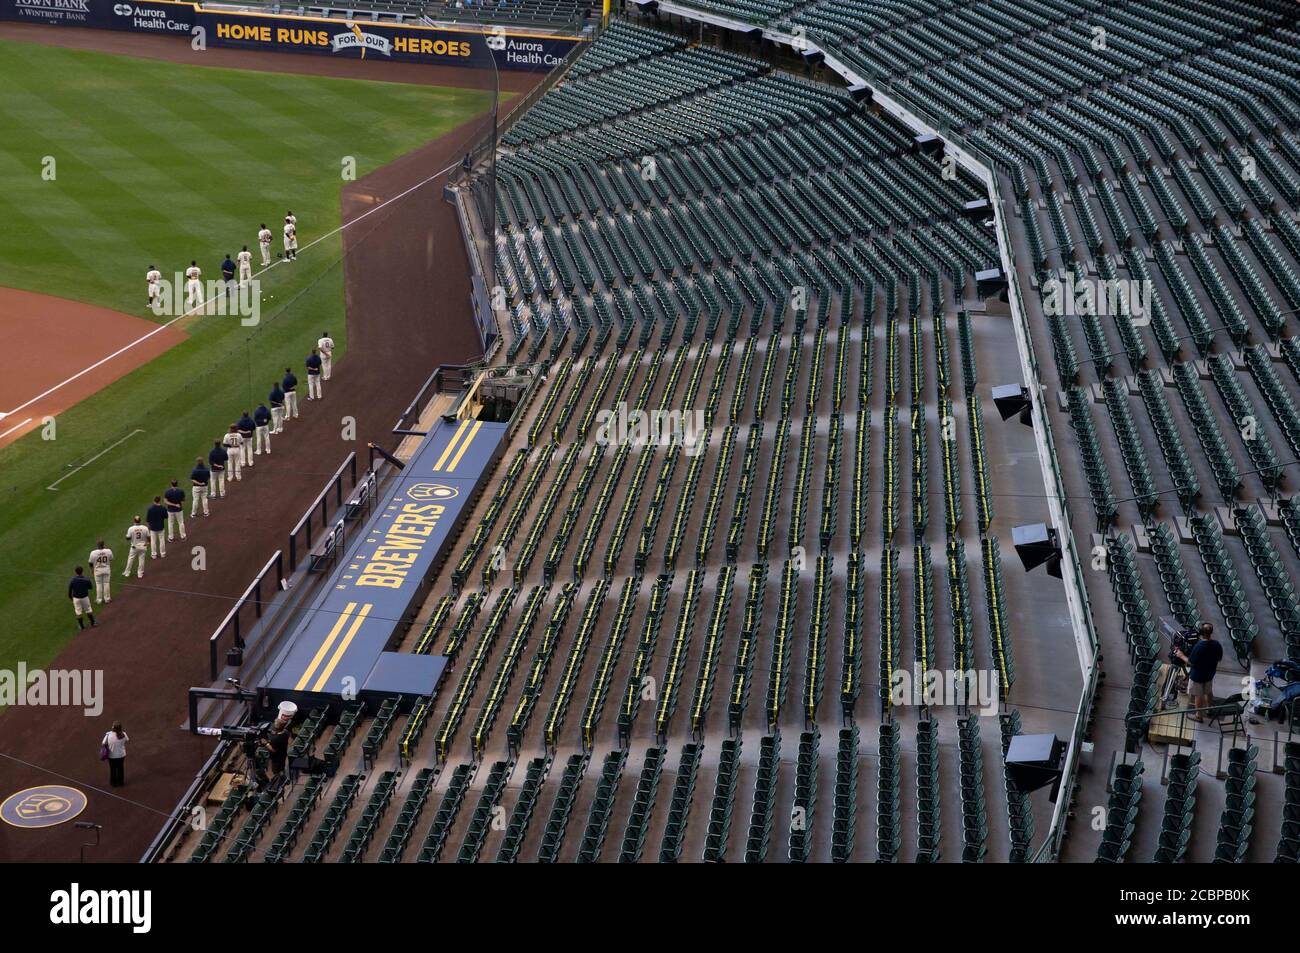 August 11, 2020: Brewers stand in front of dugout for National Anthem before the Major League Baseball game between the Milwaukee Brewers and the Minnesota Twins at Miller Park in Milwaukee, WI. John Fisher/CSM Stock Photo